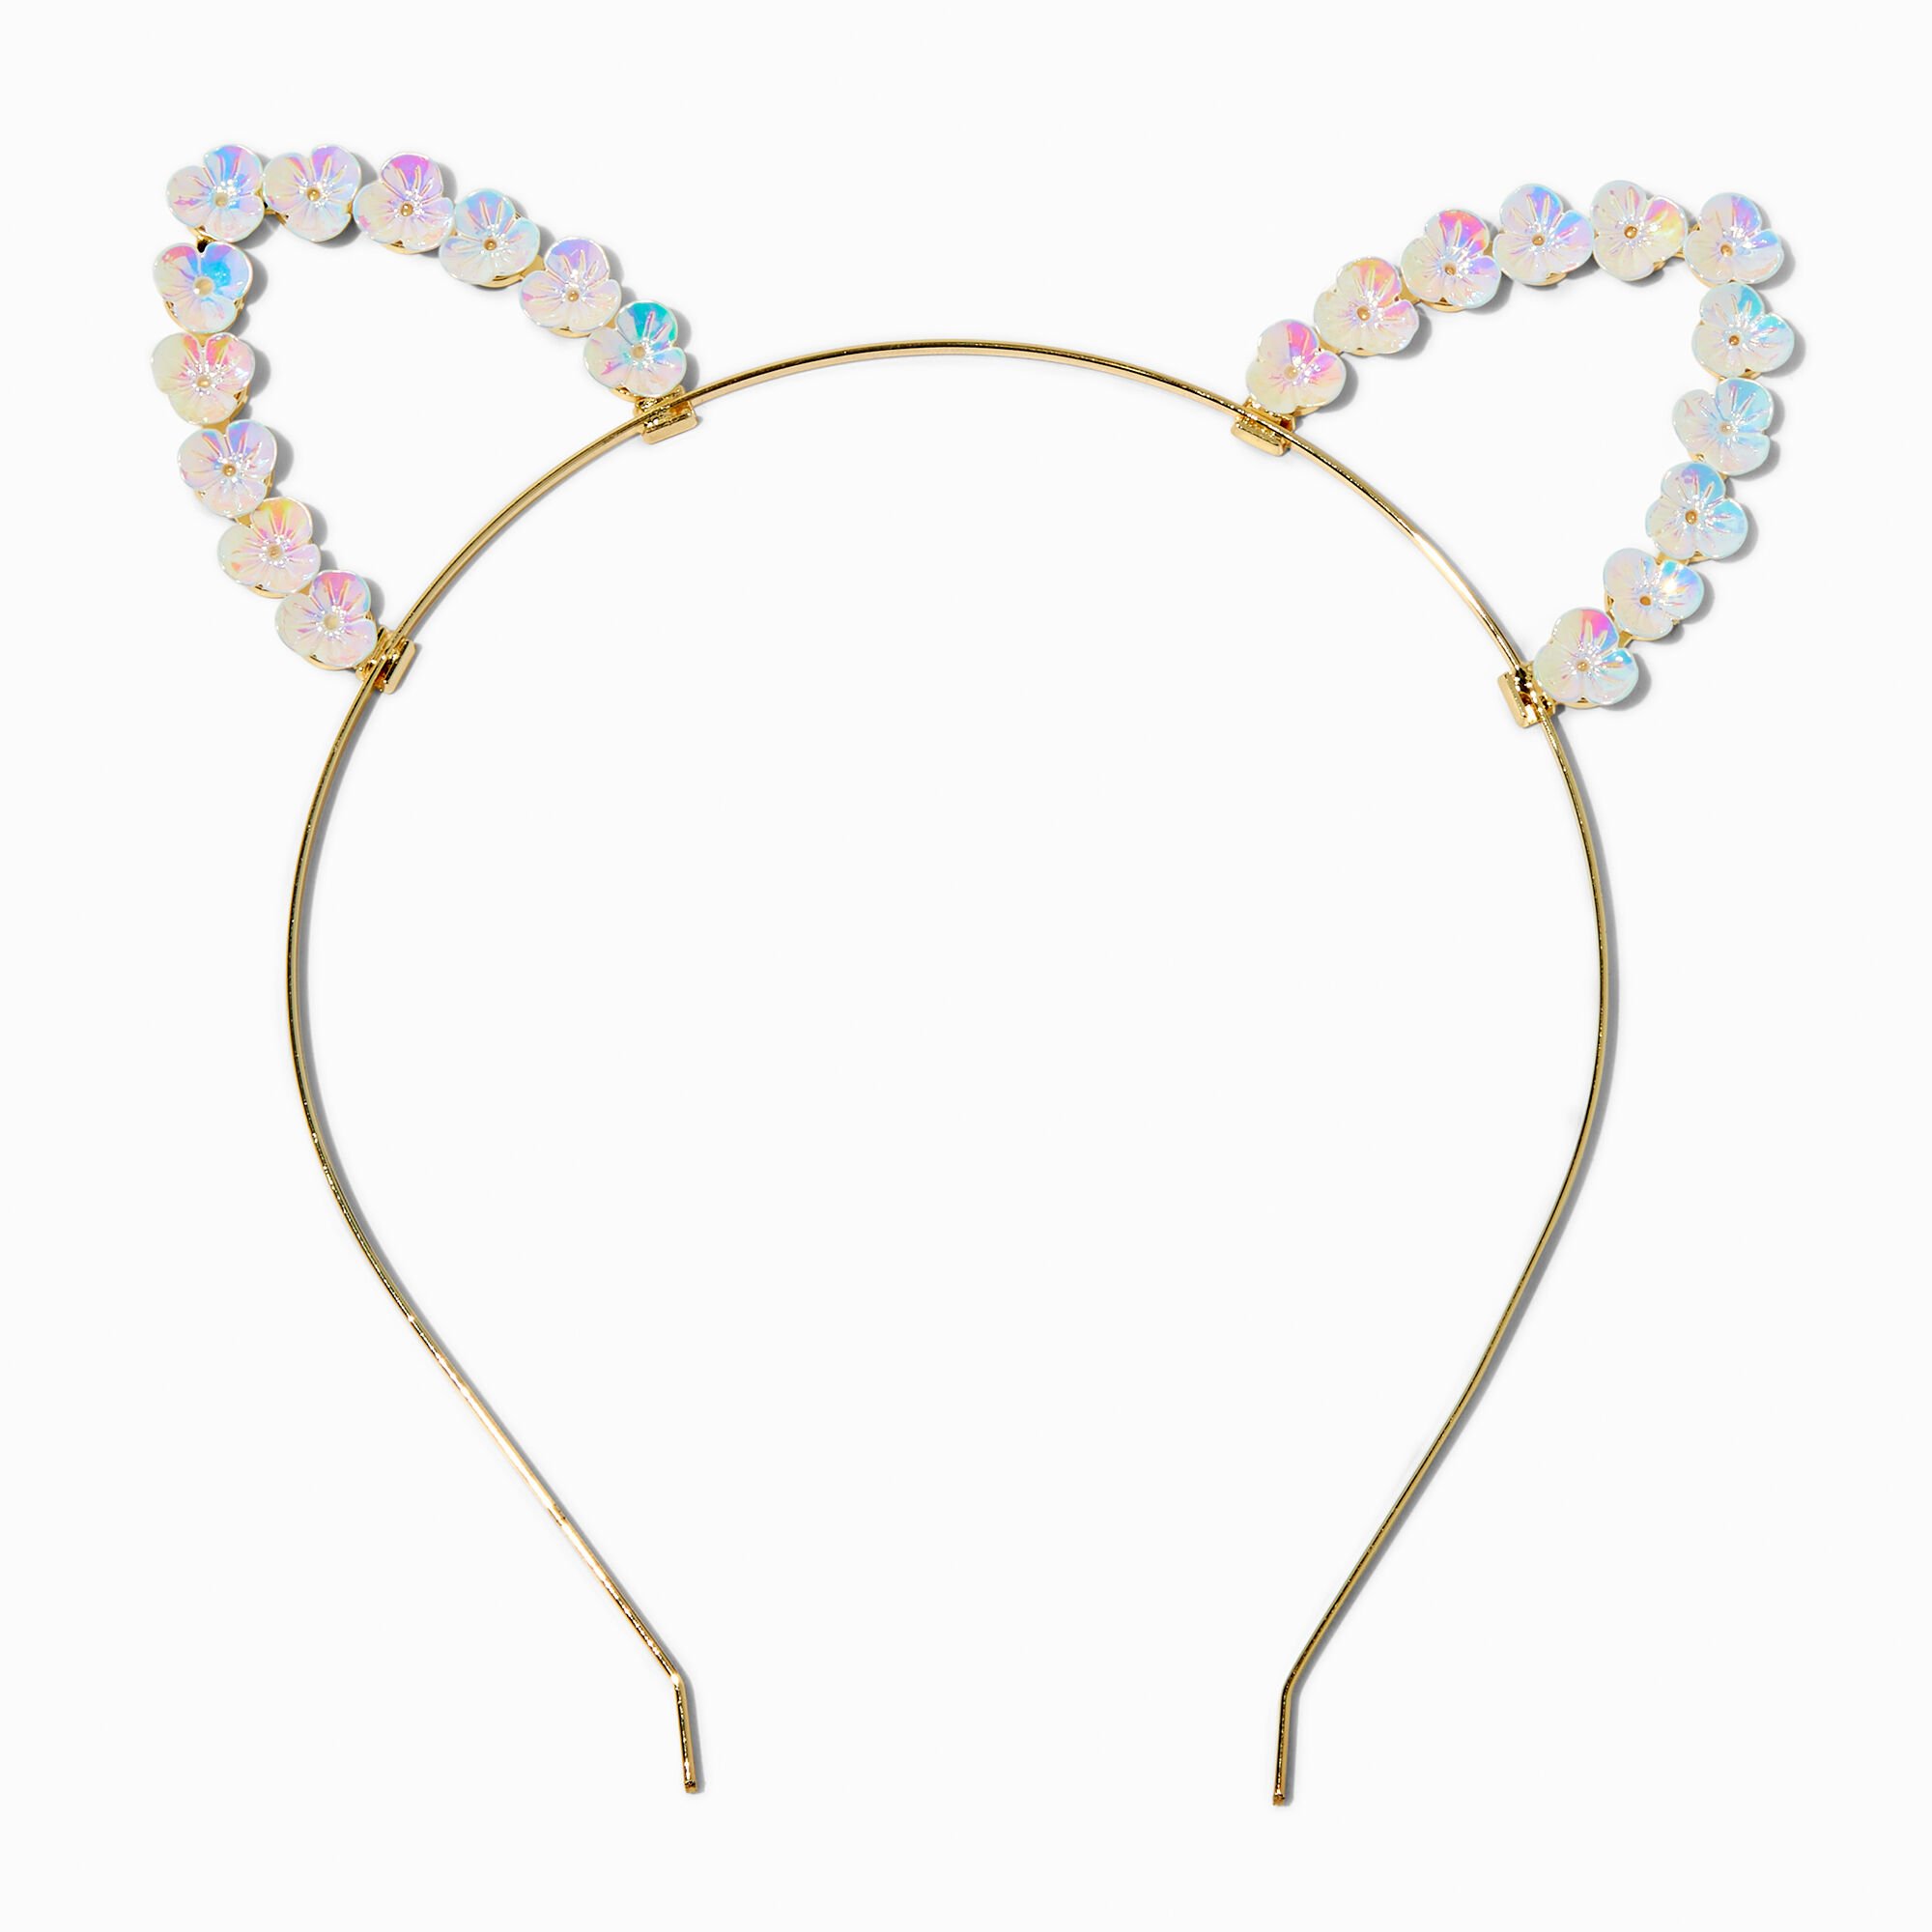 View Claires Iridescent Flowers Cat Ears Headband information